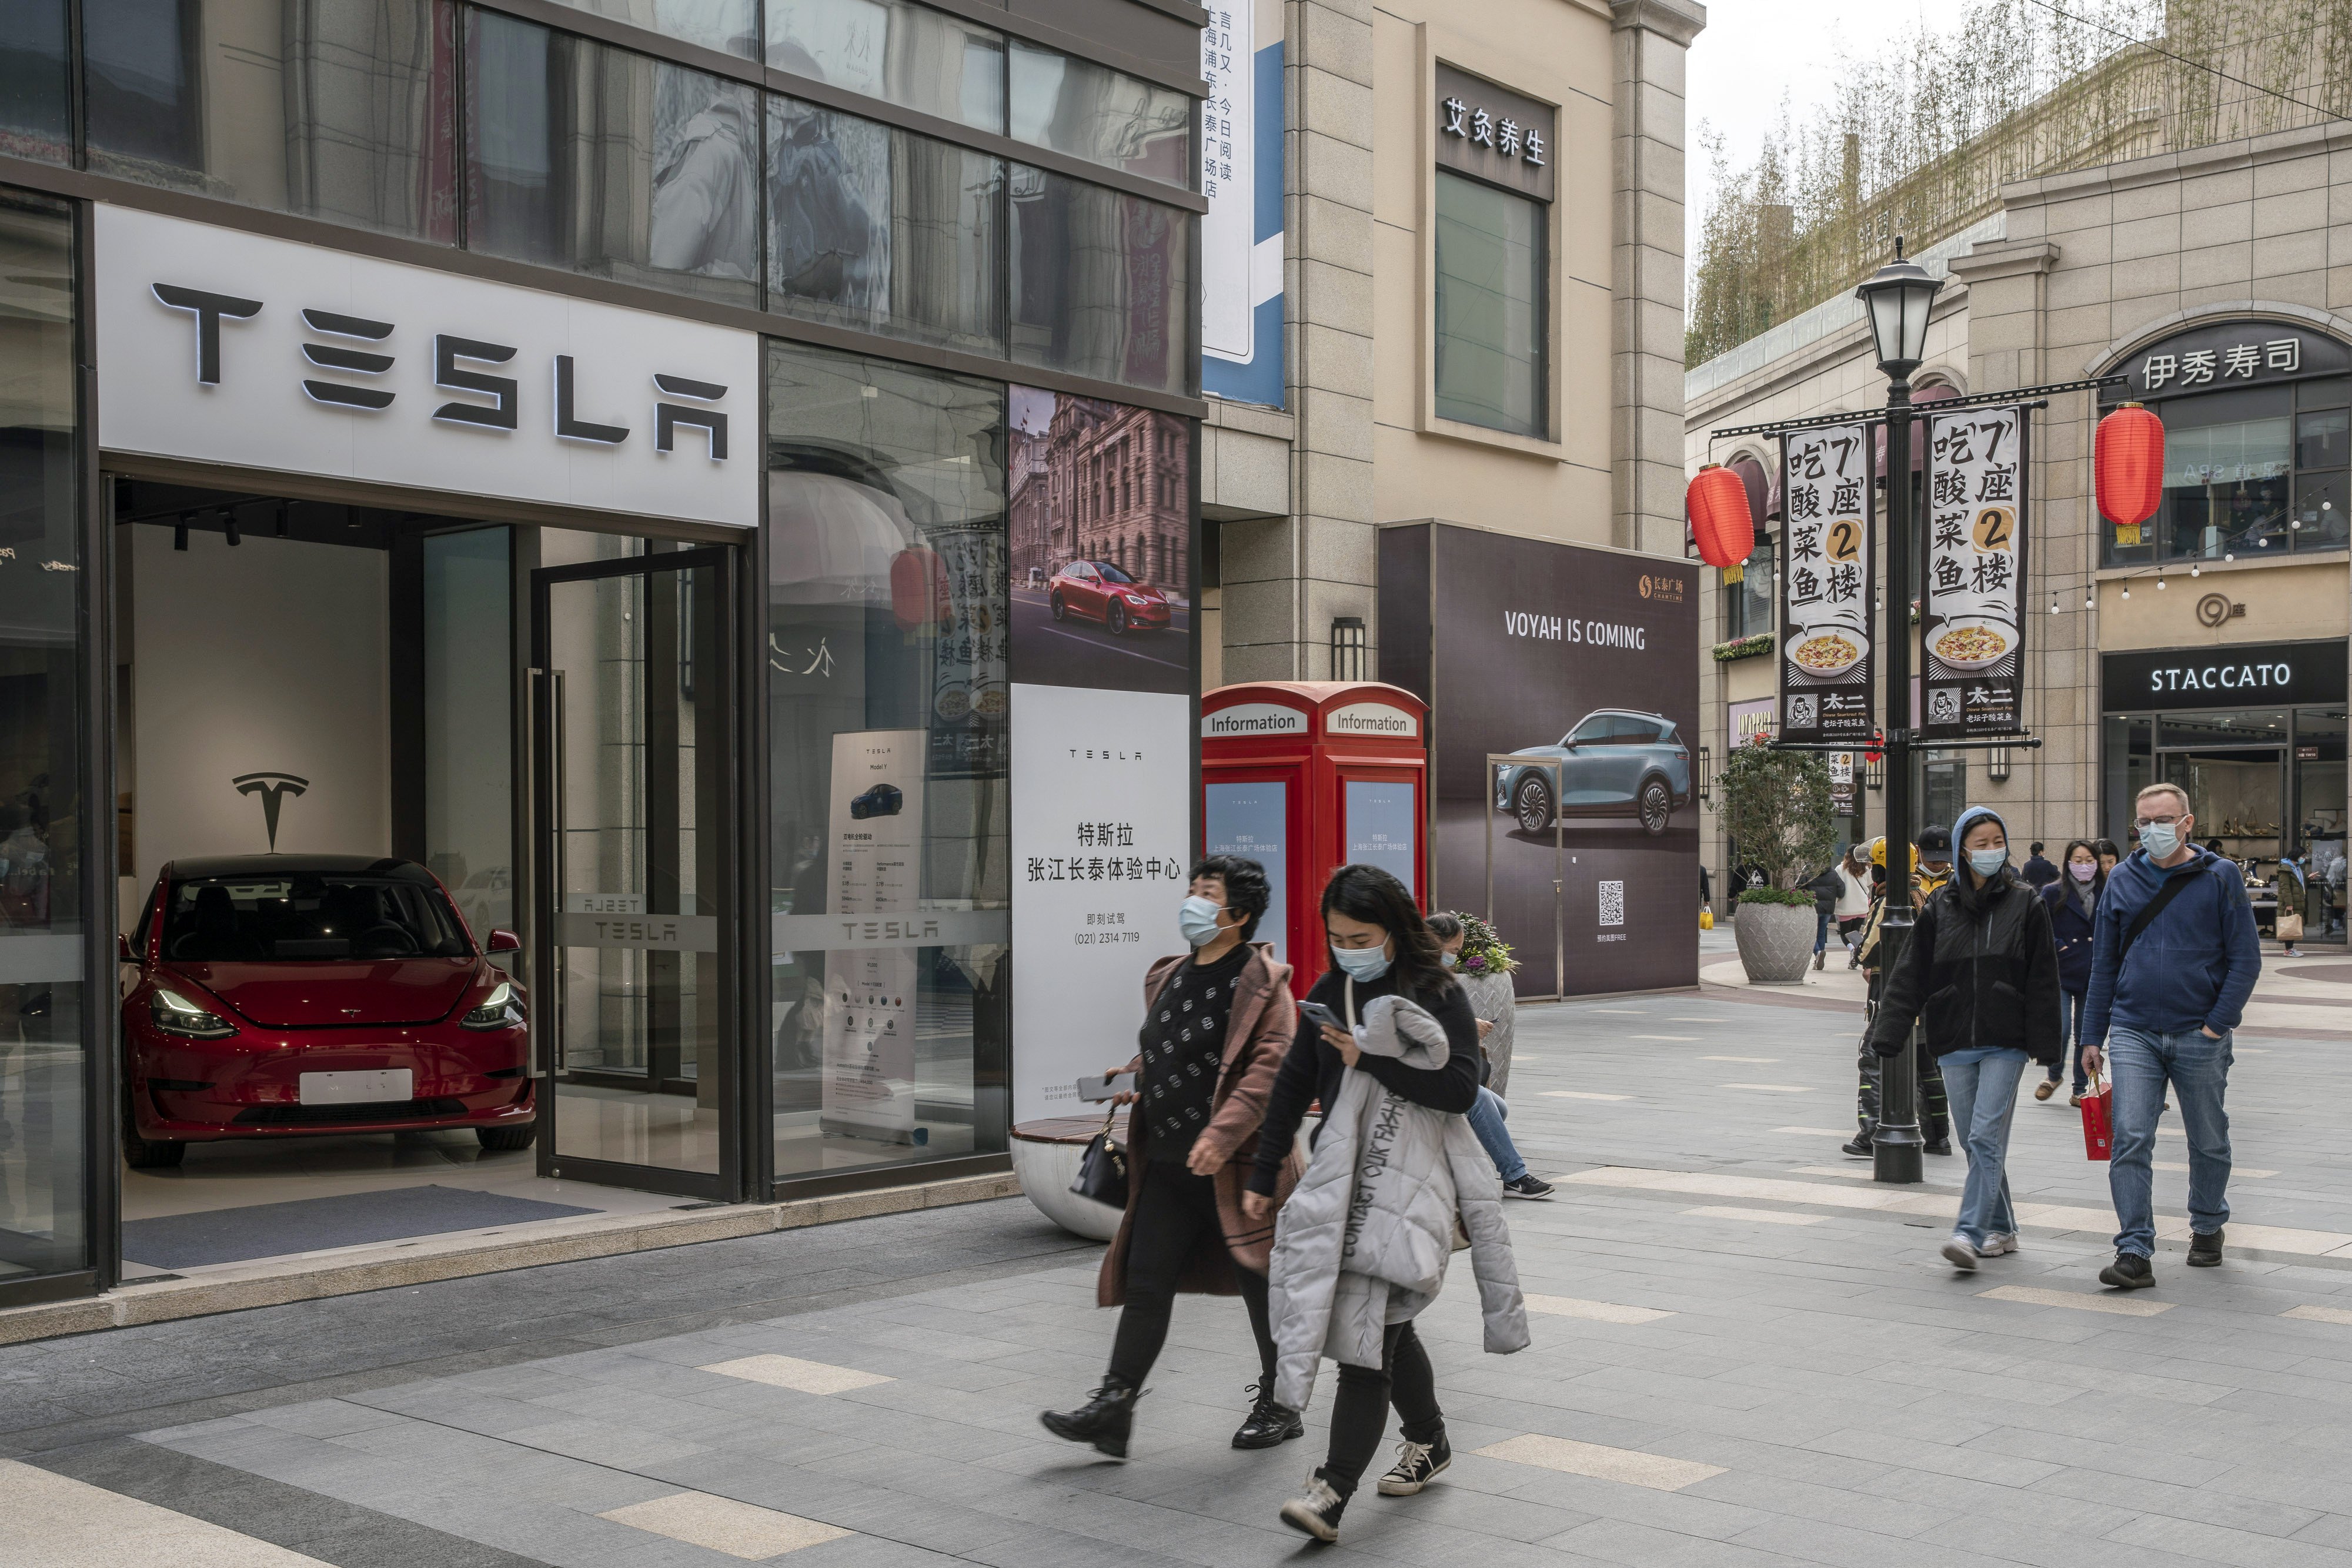 Shoppers walk past a Tesla showroom in Shanghai on March 8, 2021. Photo: Bloomberg